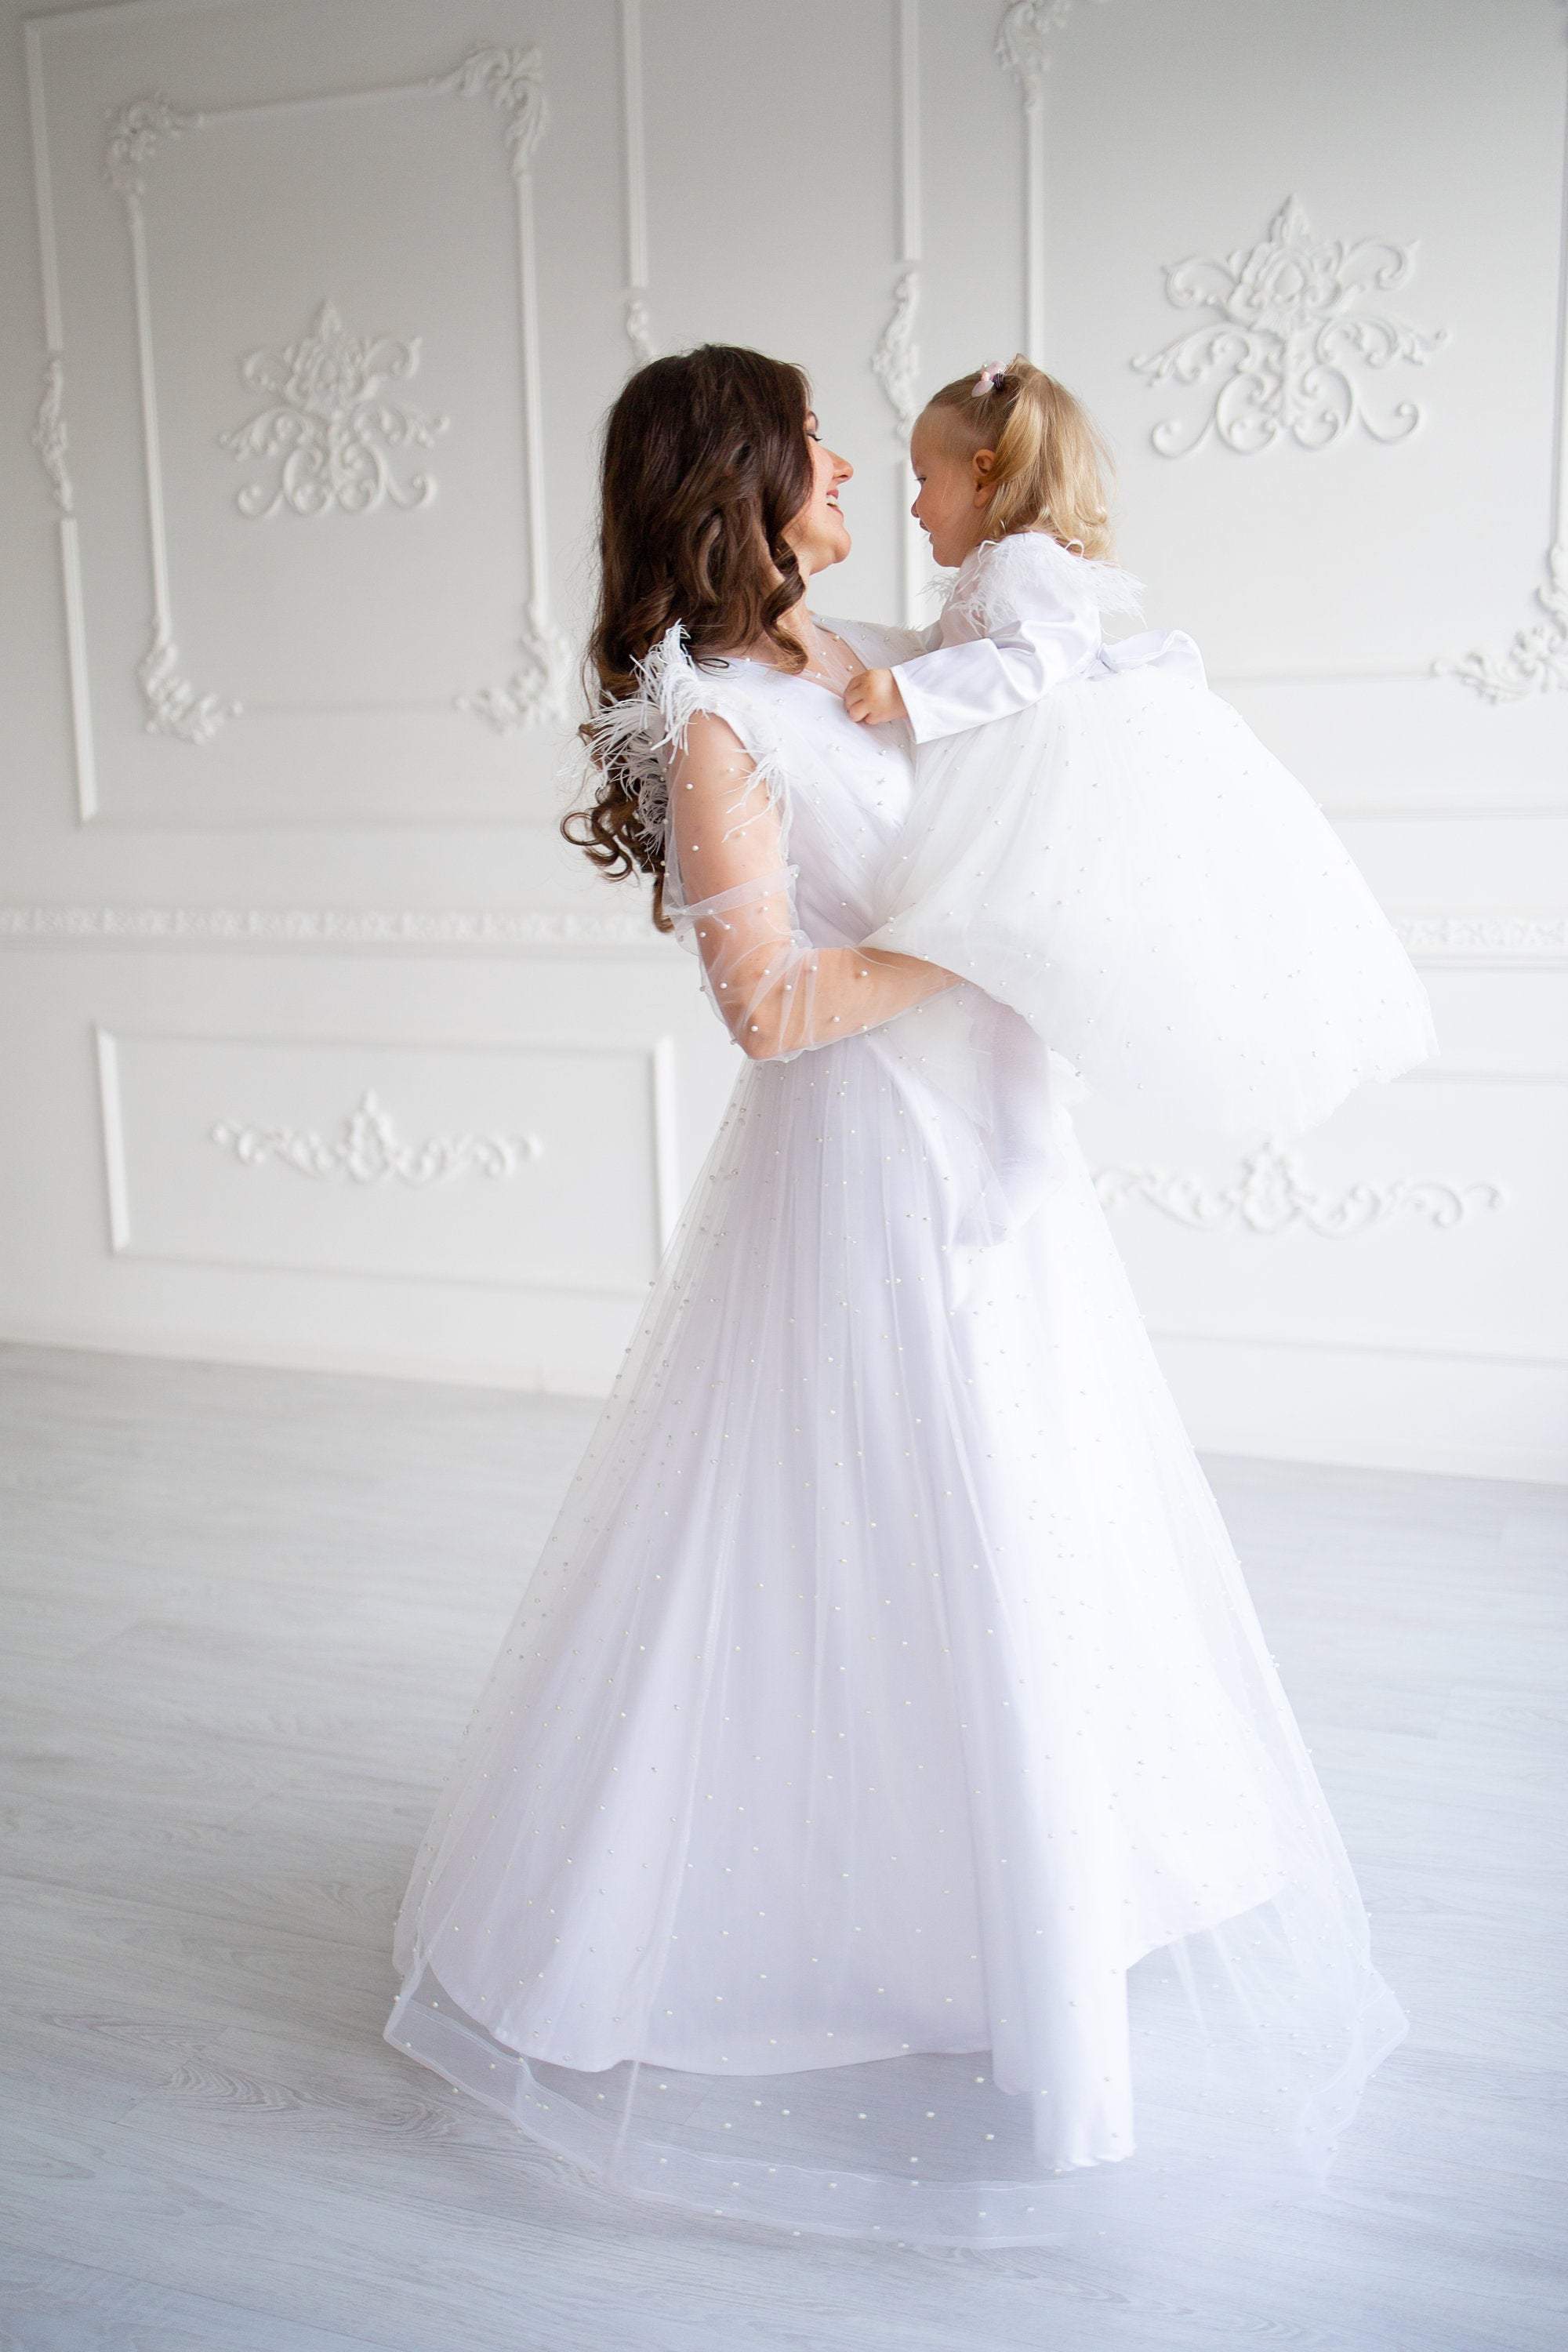 https://www.matchinglook.com/cdn/shop/products/mother-daughter-matching-wedding-dress-mommy-and-me-outfit-bridal-matching-dress-girl-princess-dress-baptism-outfit-alternative-wedding-matchinglook-765856@2x.jpg?v=1627889032